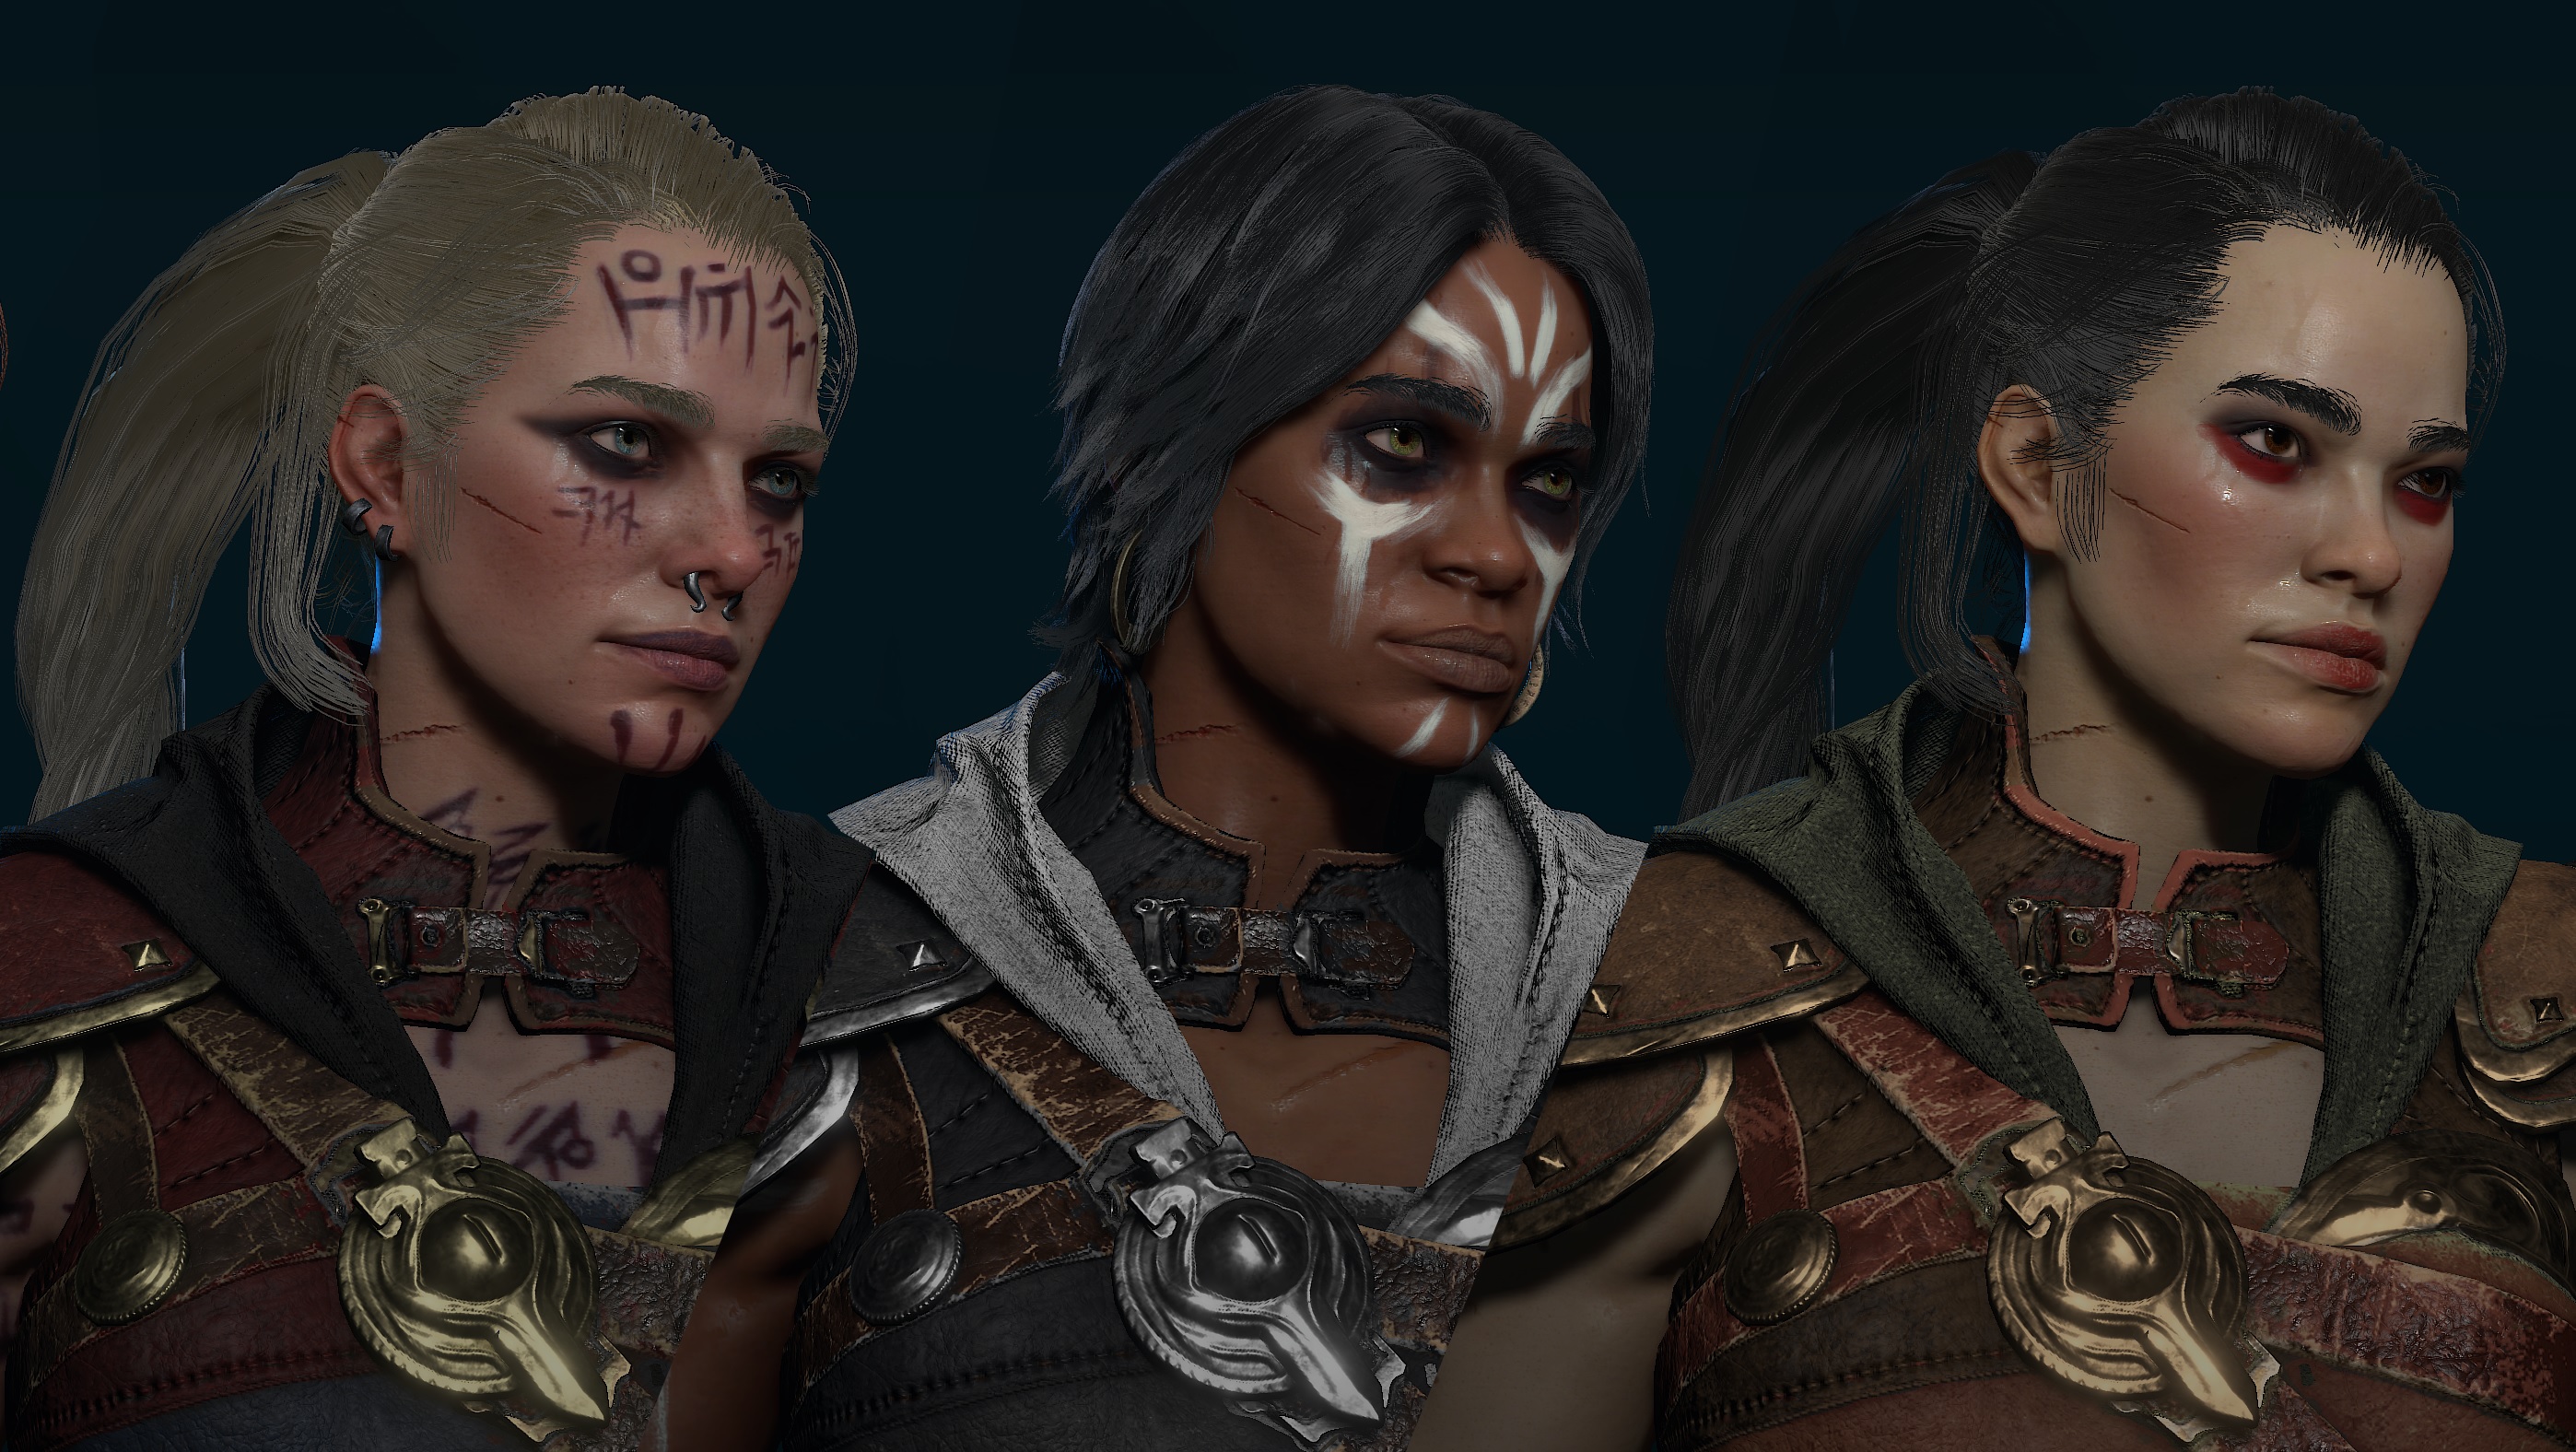 Diablo 4 in development screenshot of three Druid characters with different hairstyles, facial markings, and skin colors.